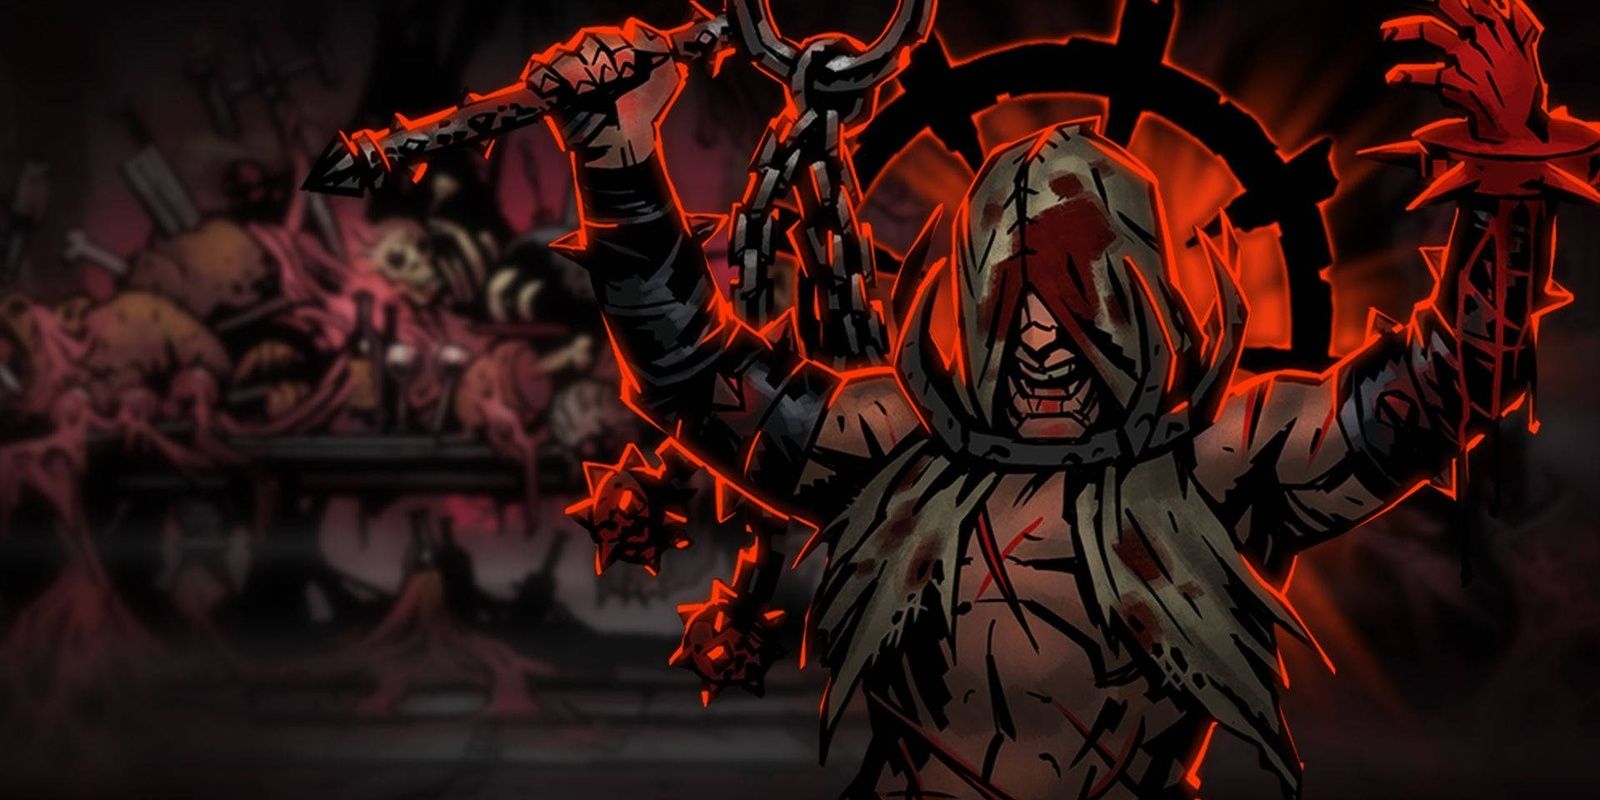 The official Red Hook Studio wallpaper for Flagellant from Darkest Dungeon